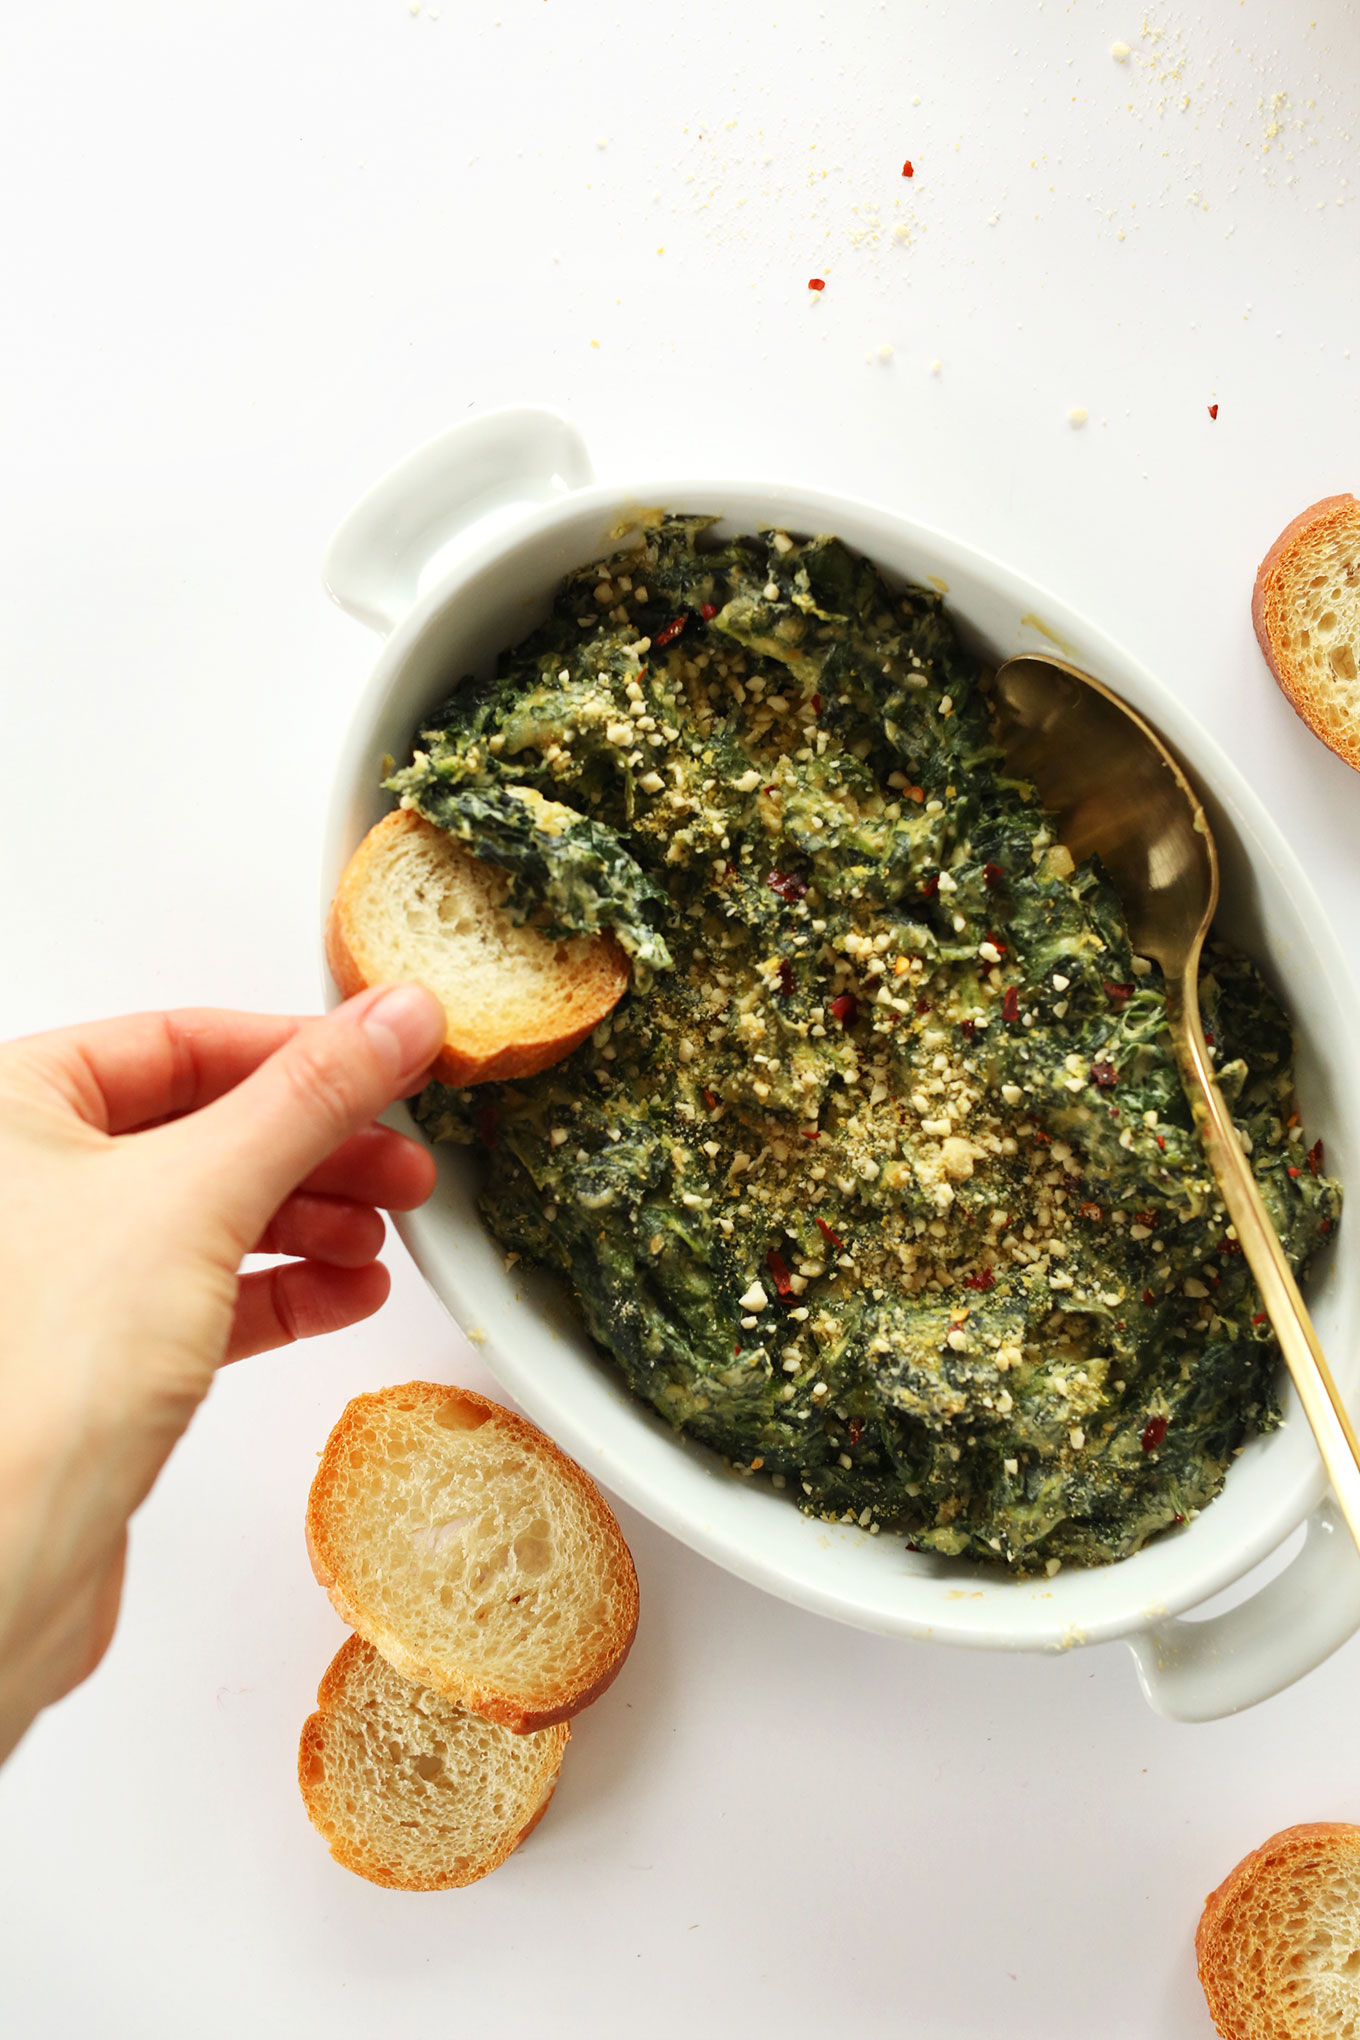 Dipping a slice of bread into our Creamy Vegan Kale and Spinach Dip